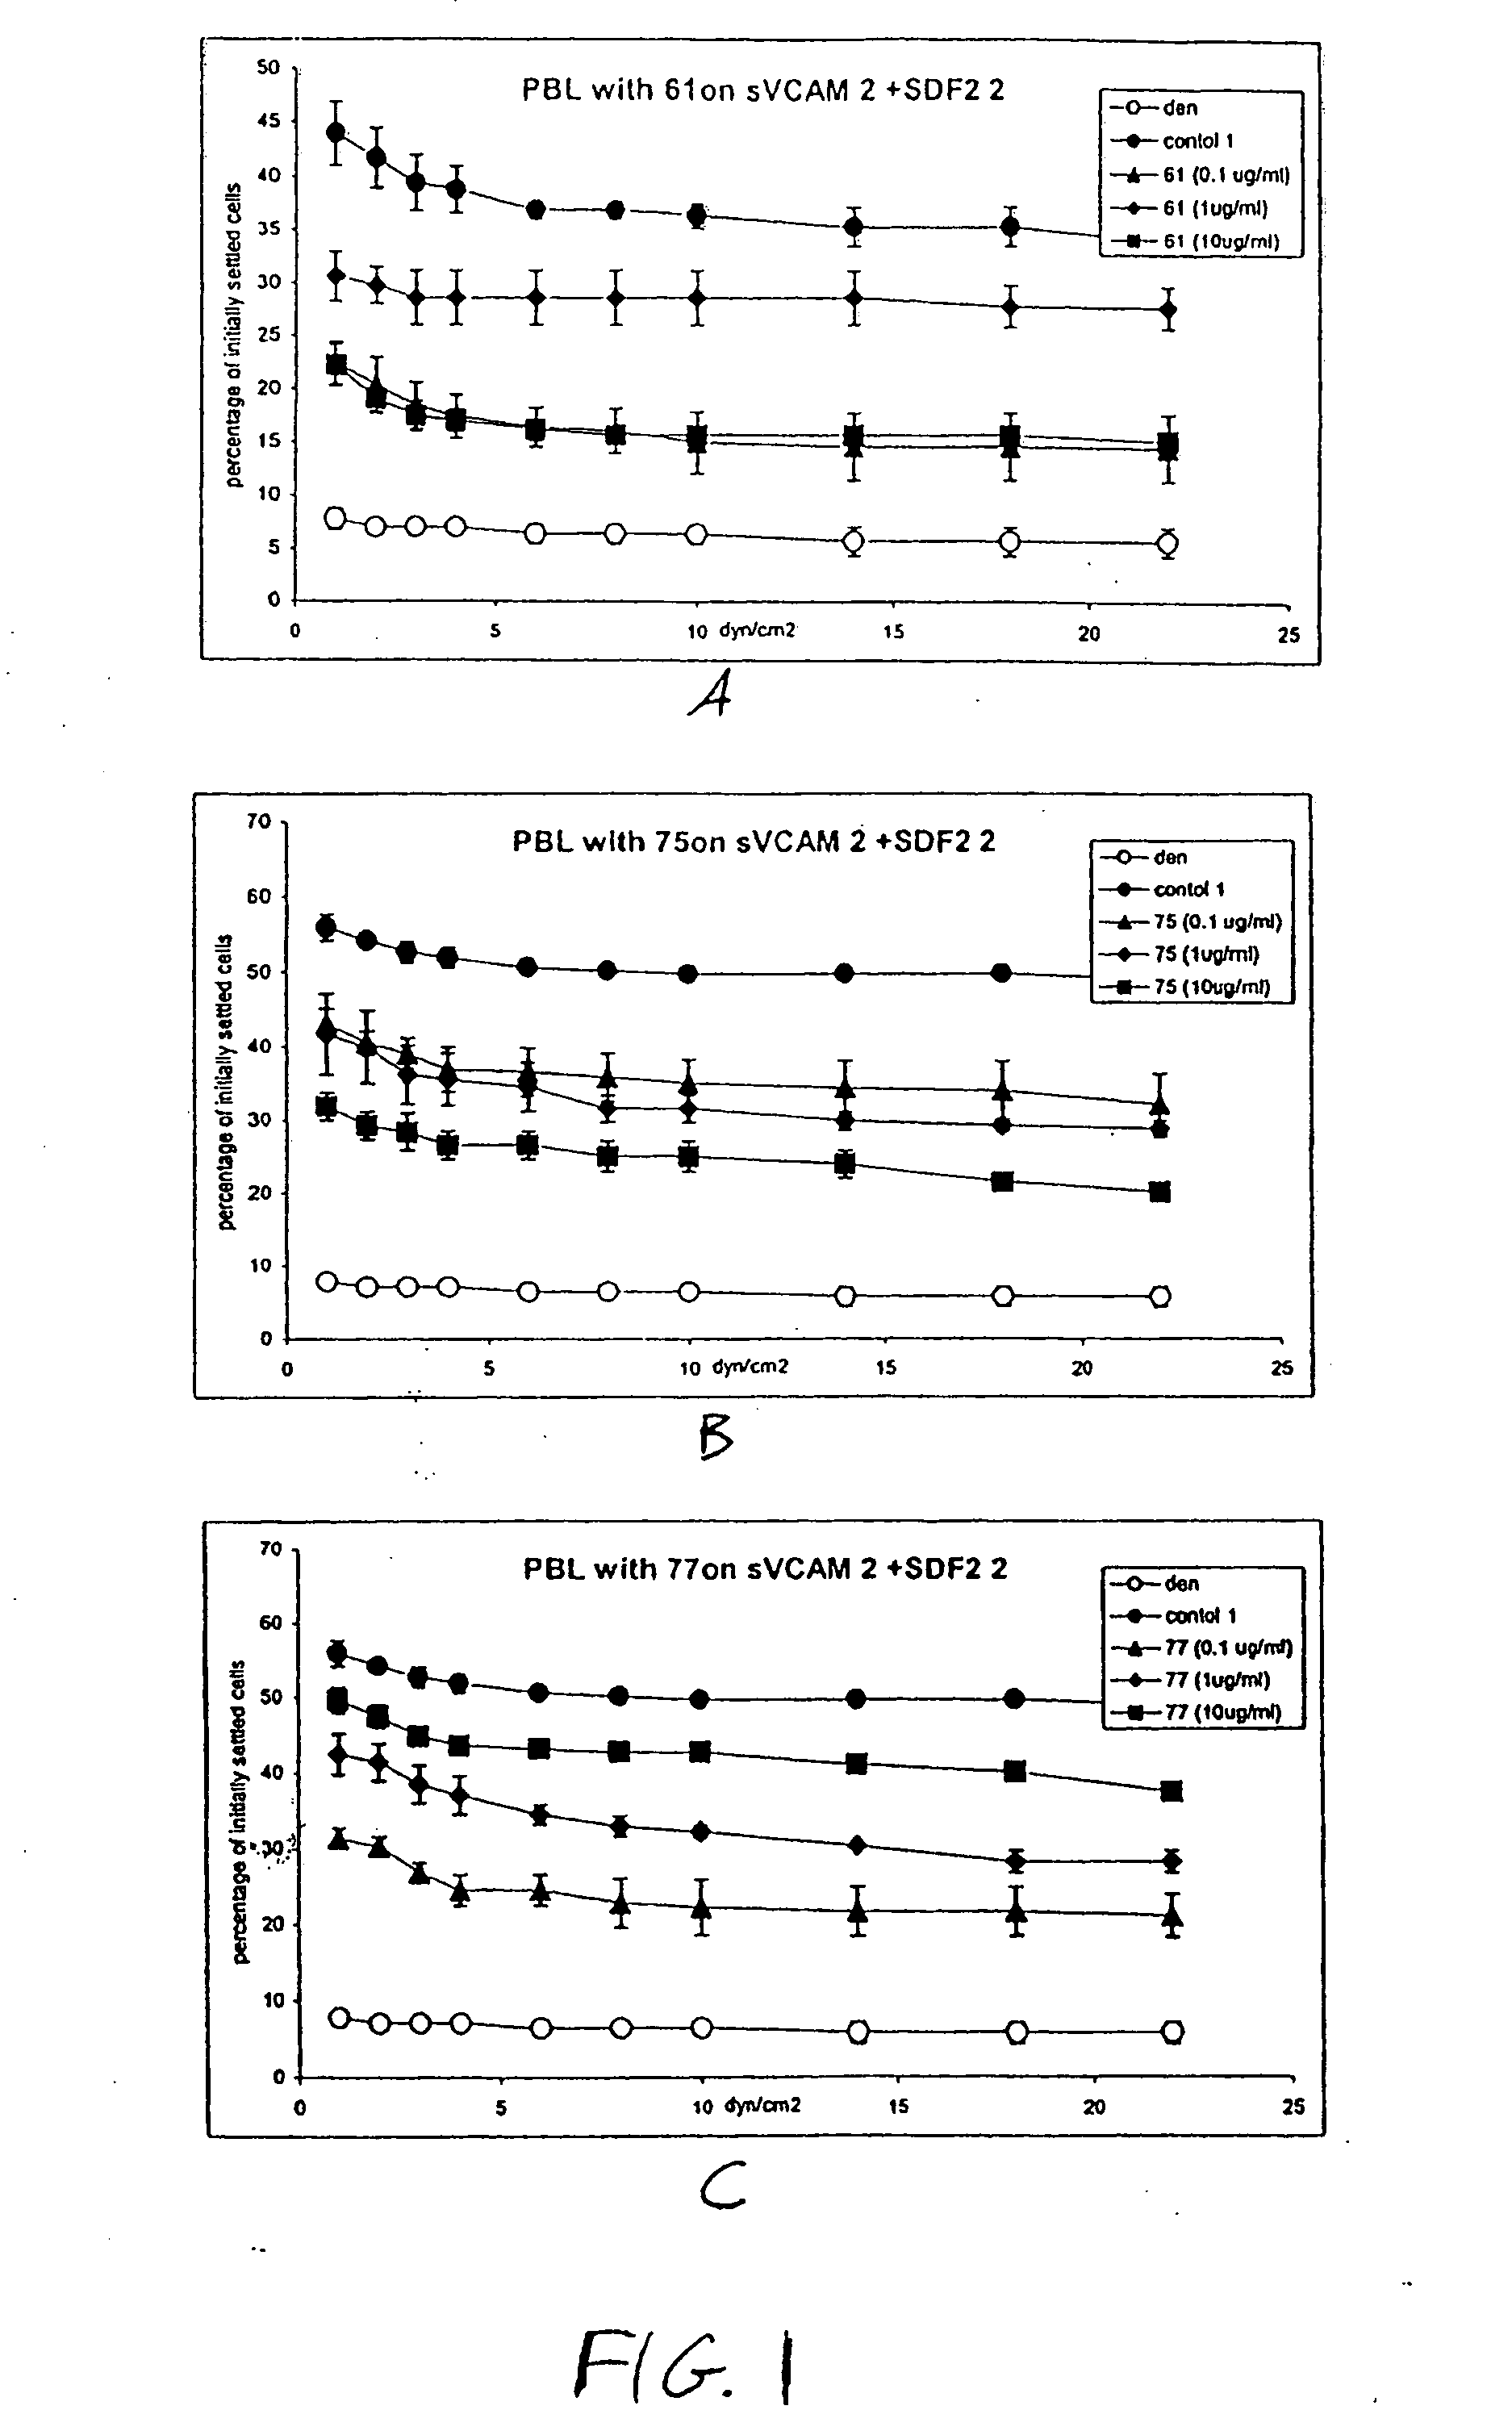 Compounds for use in the treatment of aids and other viral diseases and HIV-related infections and compositions containing such compounds, methods of treating such diseases and infections and methods of making such compounds and compositions